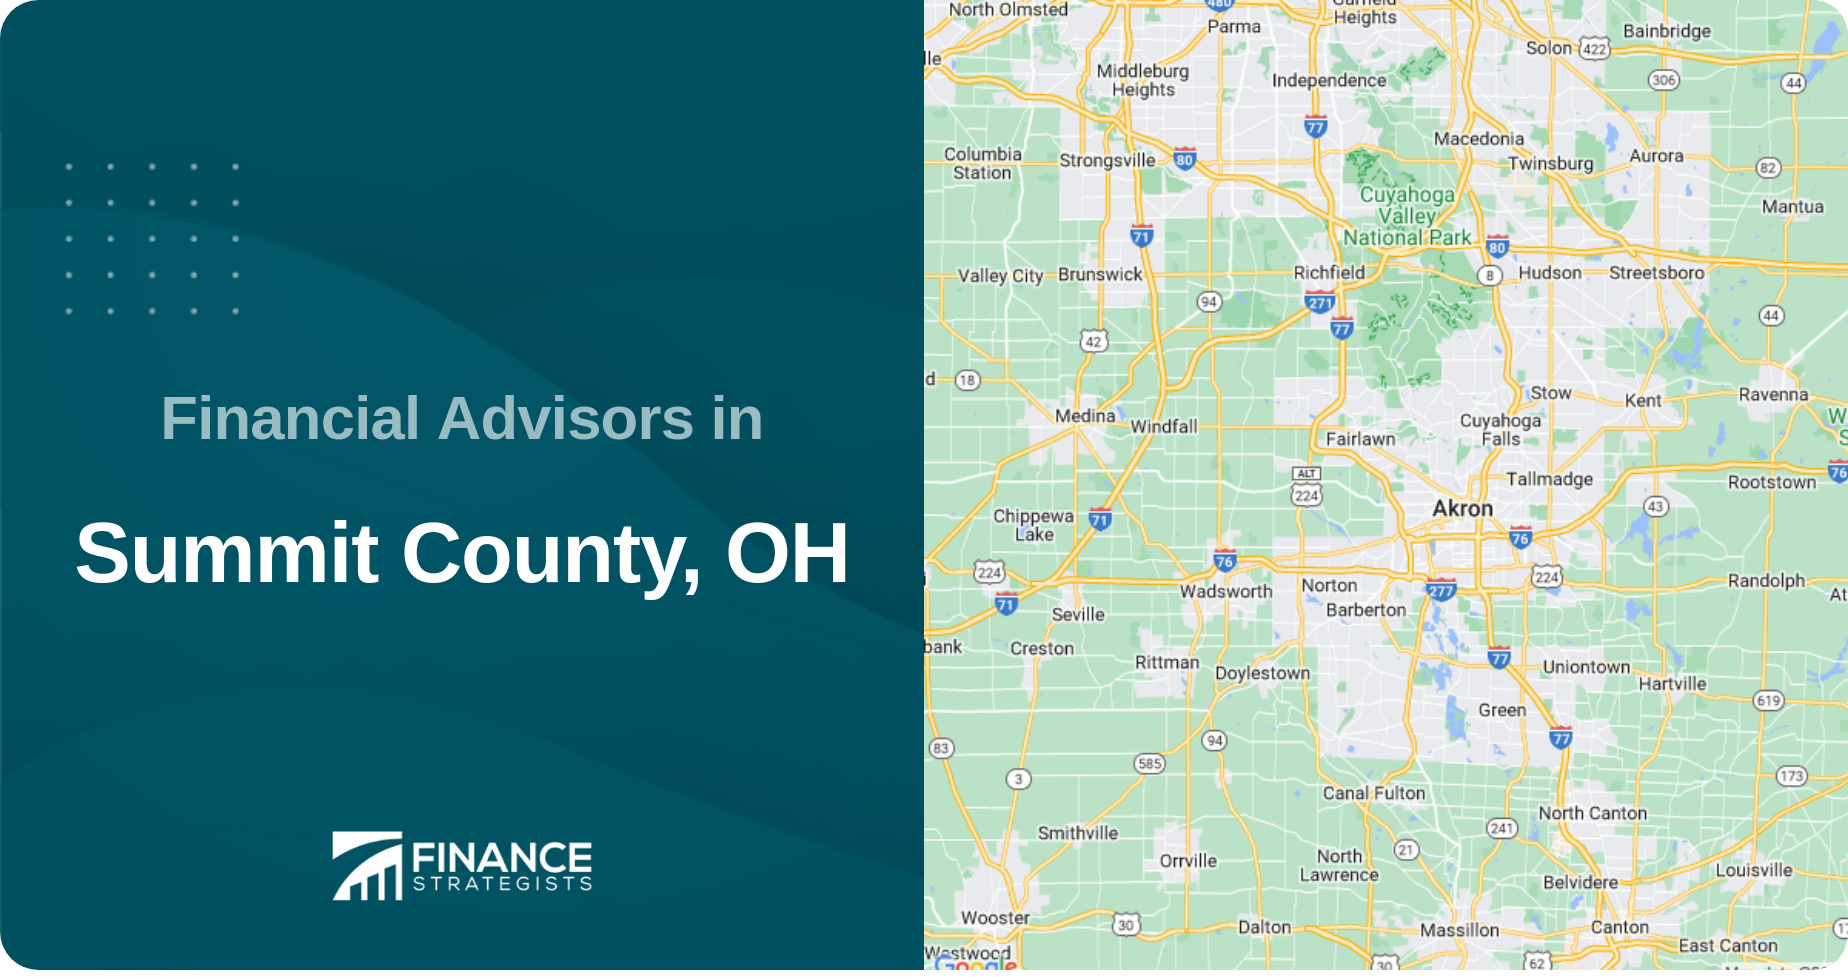 Financial Advisors in Summit County, OH